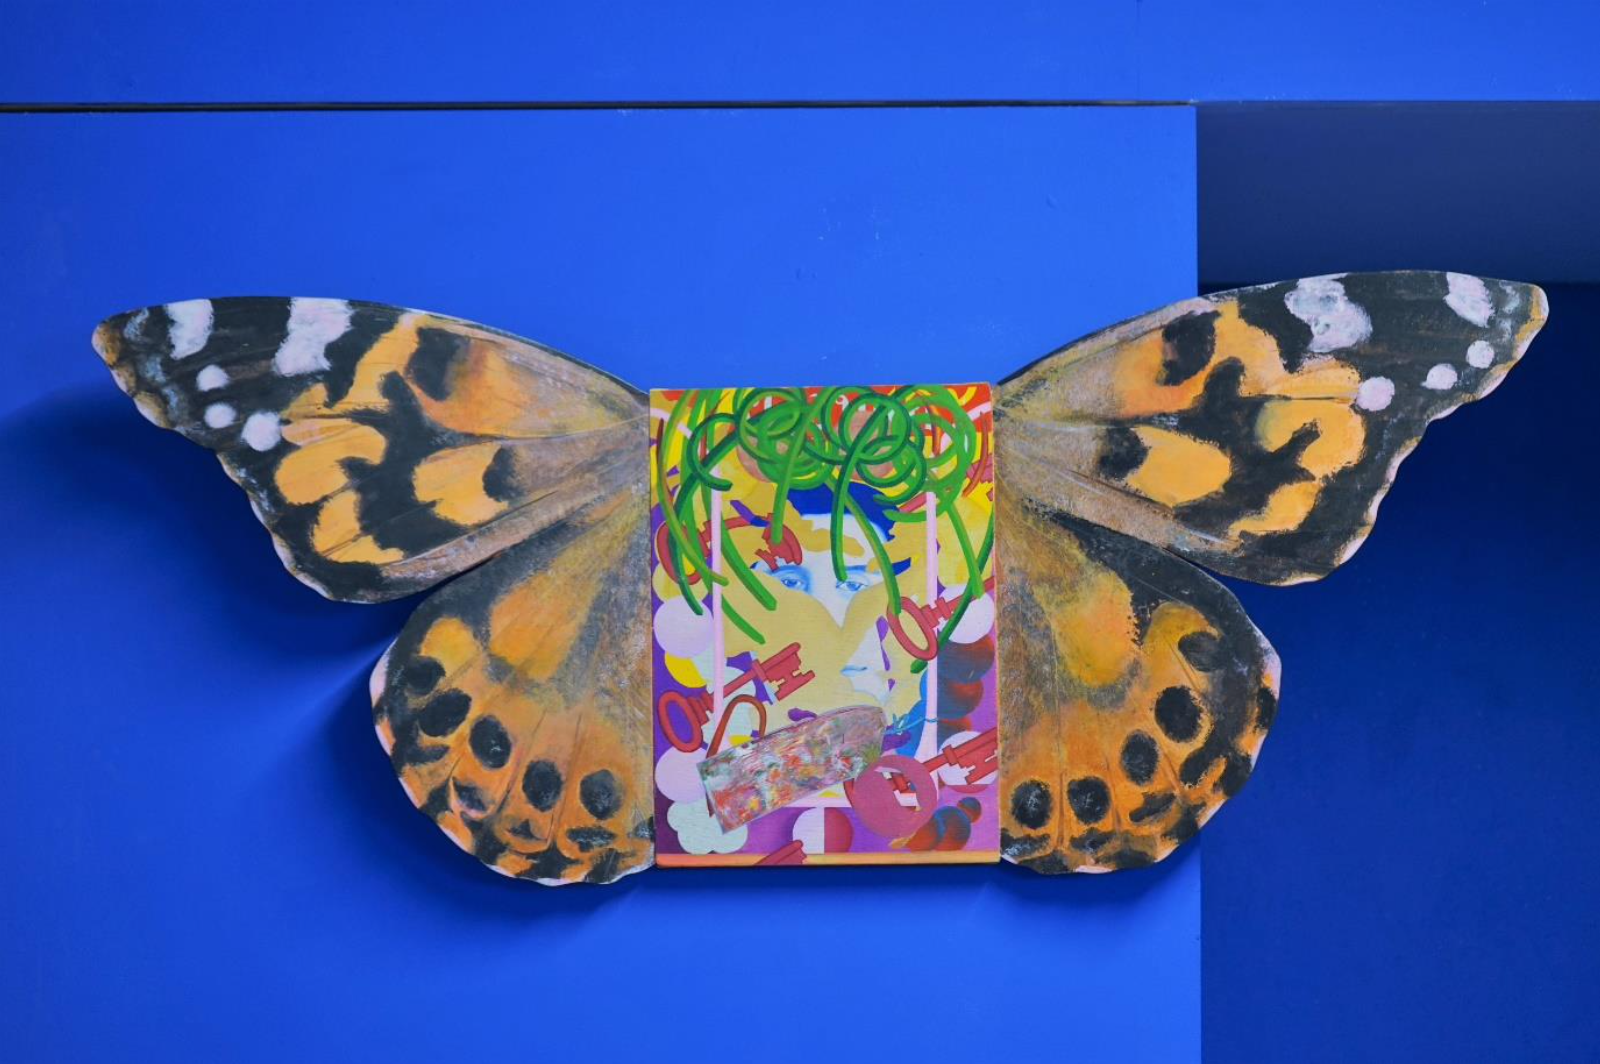 Painted Lady, Oil and acrylic on wood and canvas, 54 x 127cm, 2019